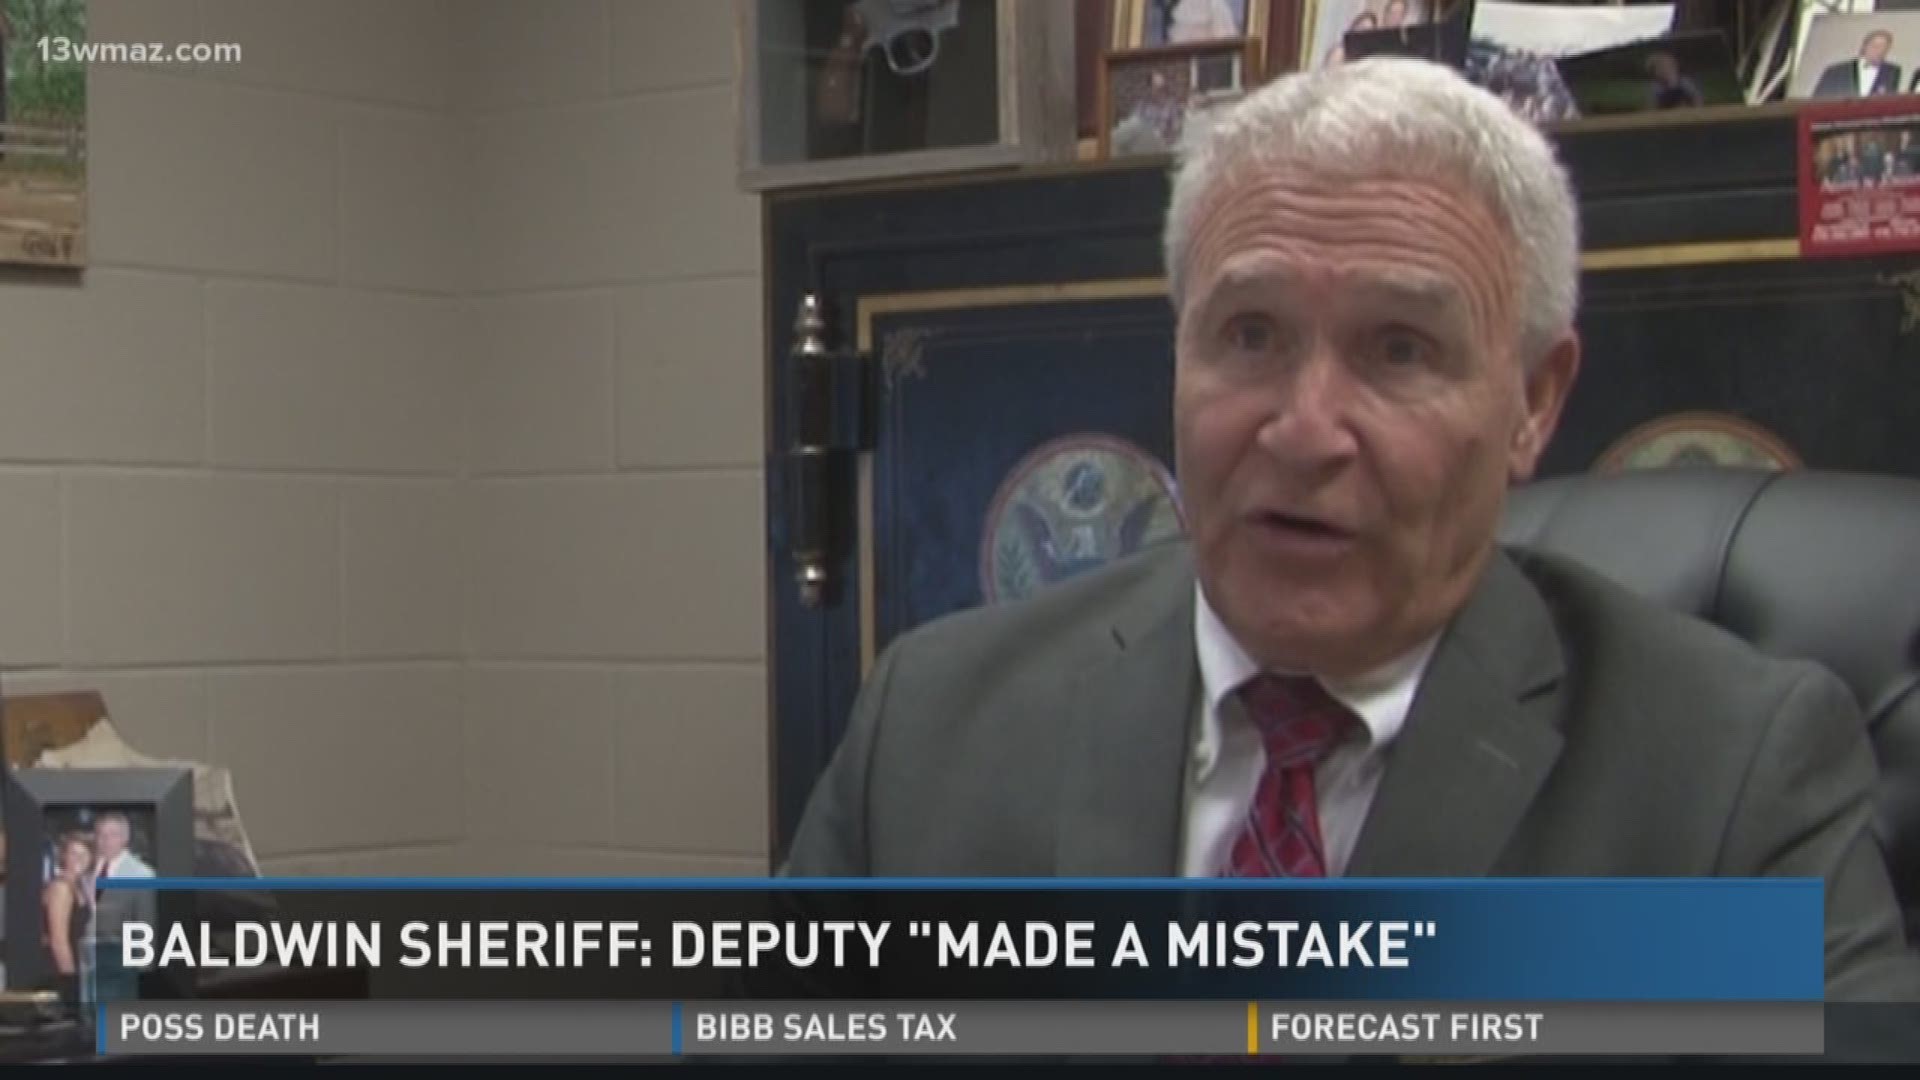 Follow-up on Baldwin Co. Officer Involved Shooting. Sheriff Bill Massee says the deputy "made a mistake"